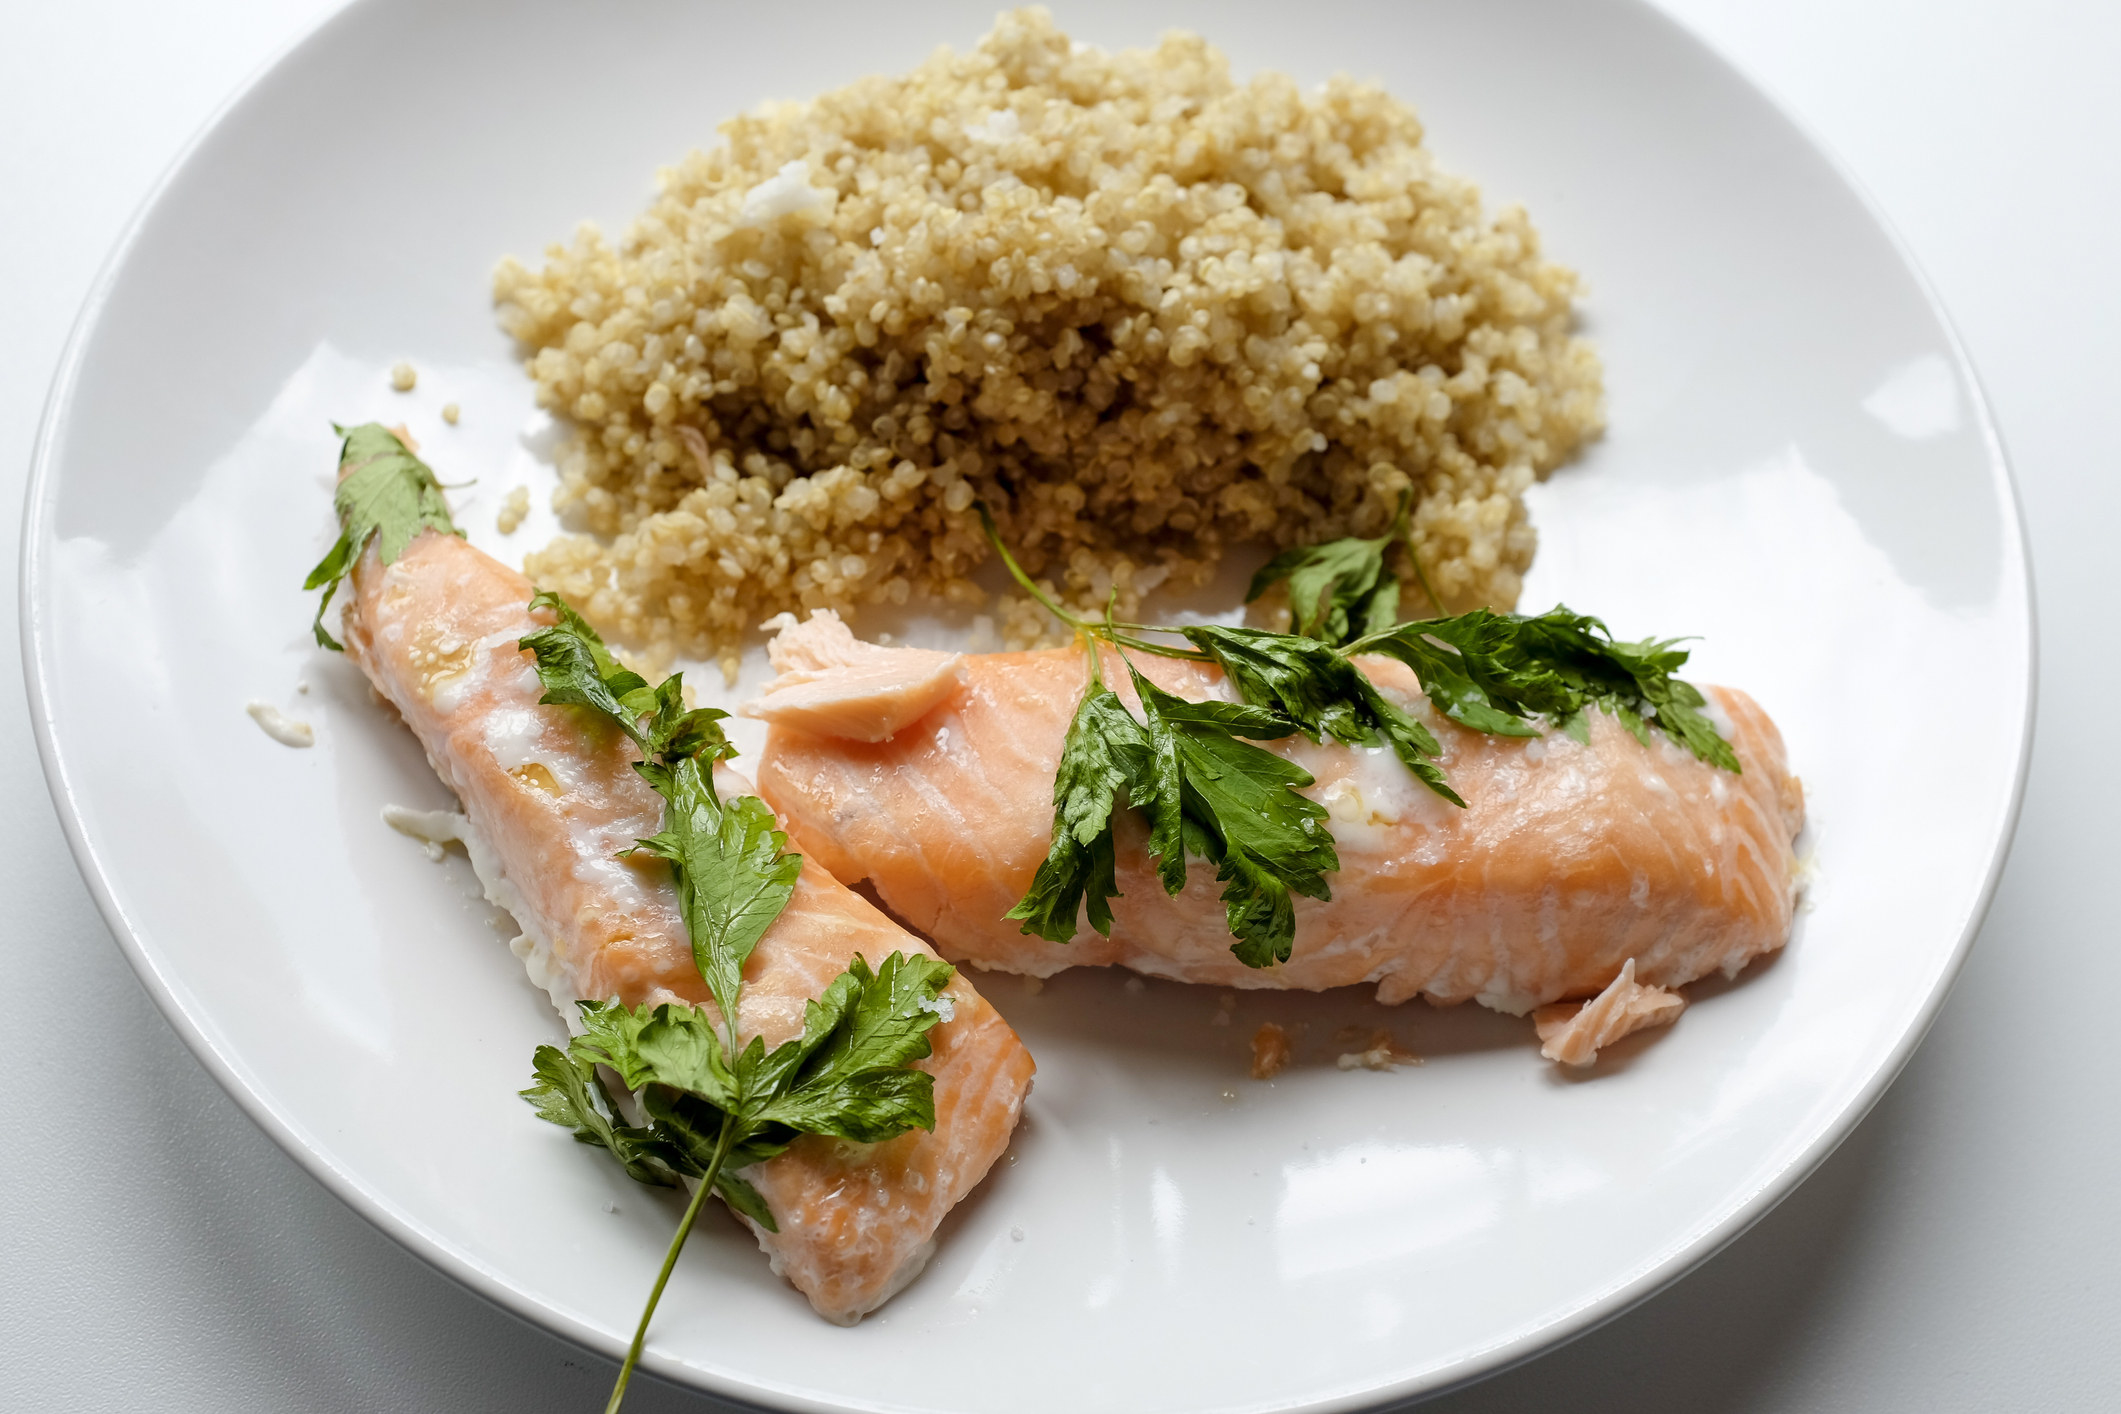 Plate of salmon with quinoa.